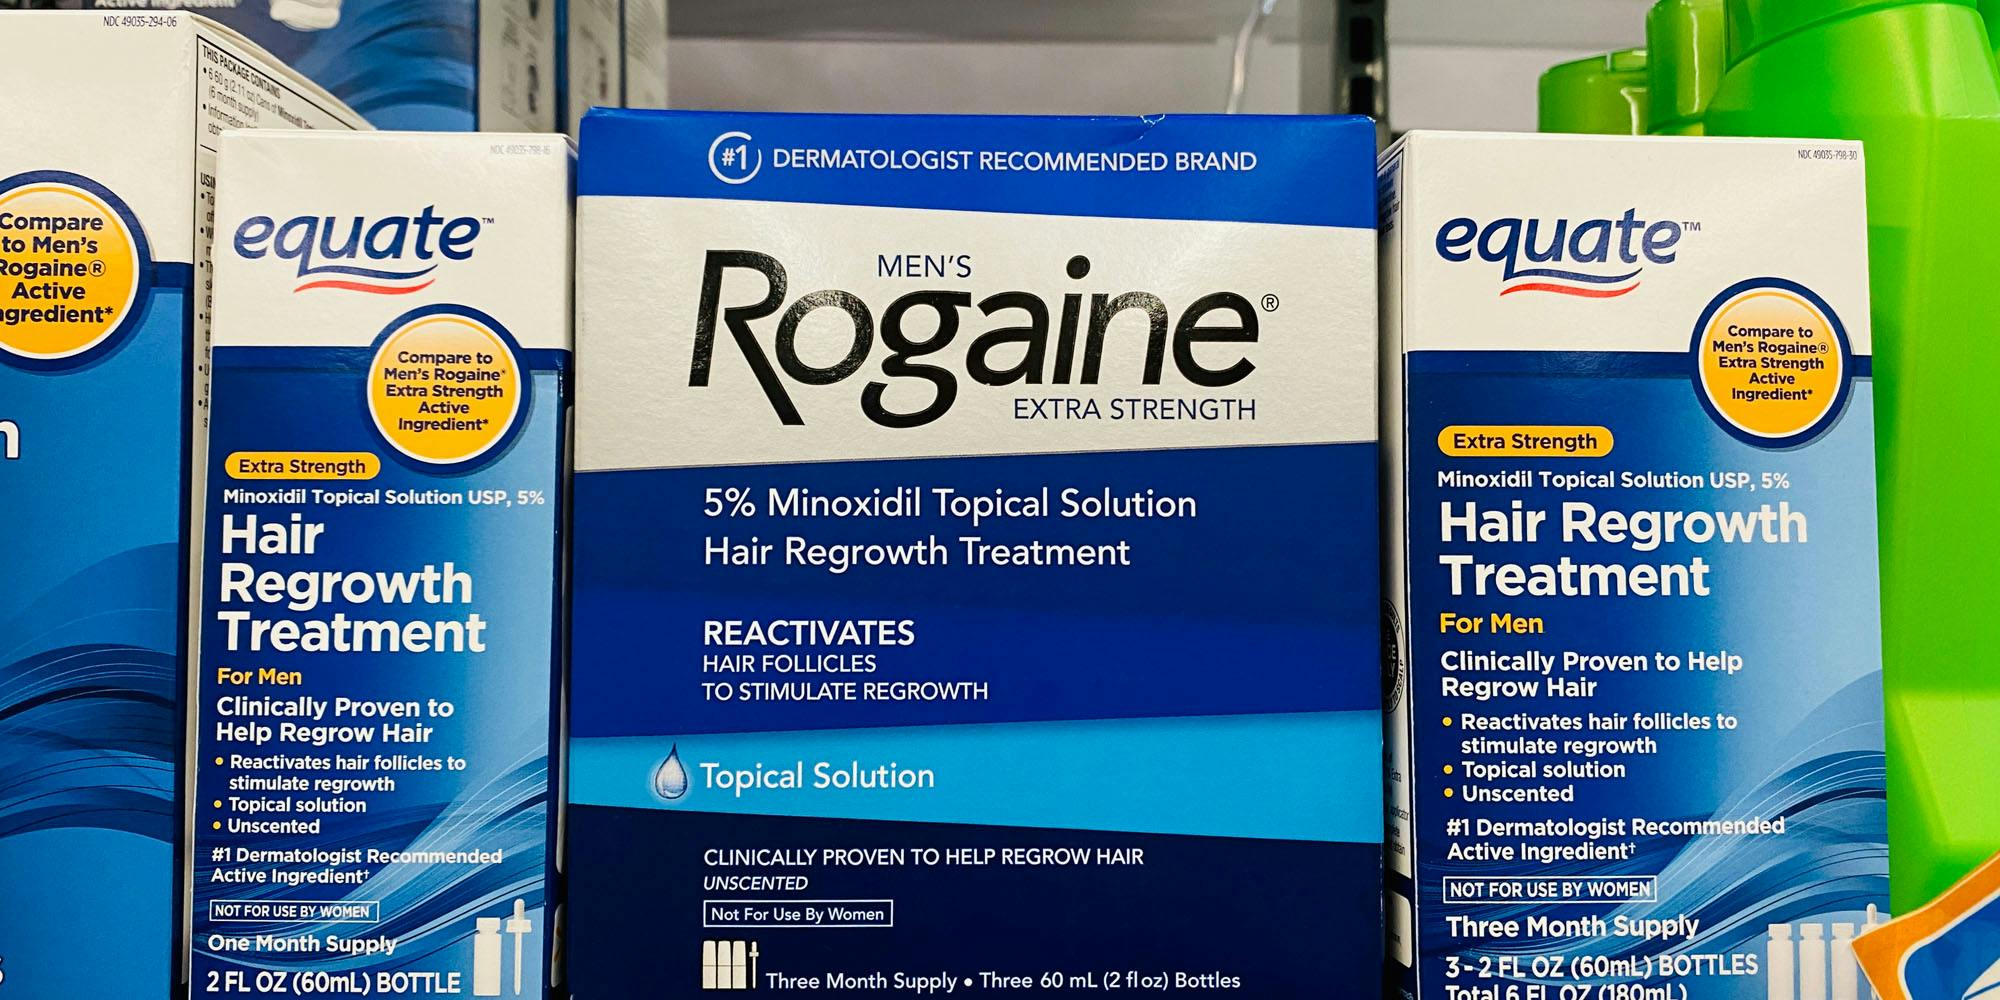 Items on store shelf, hair growth treatments with Rogaine extra strength in the middle (name brand)